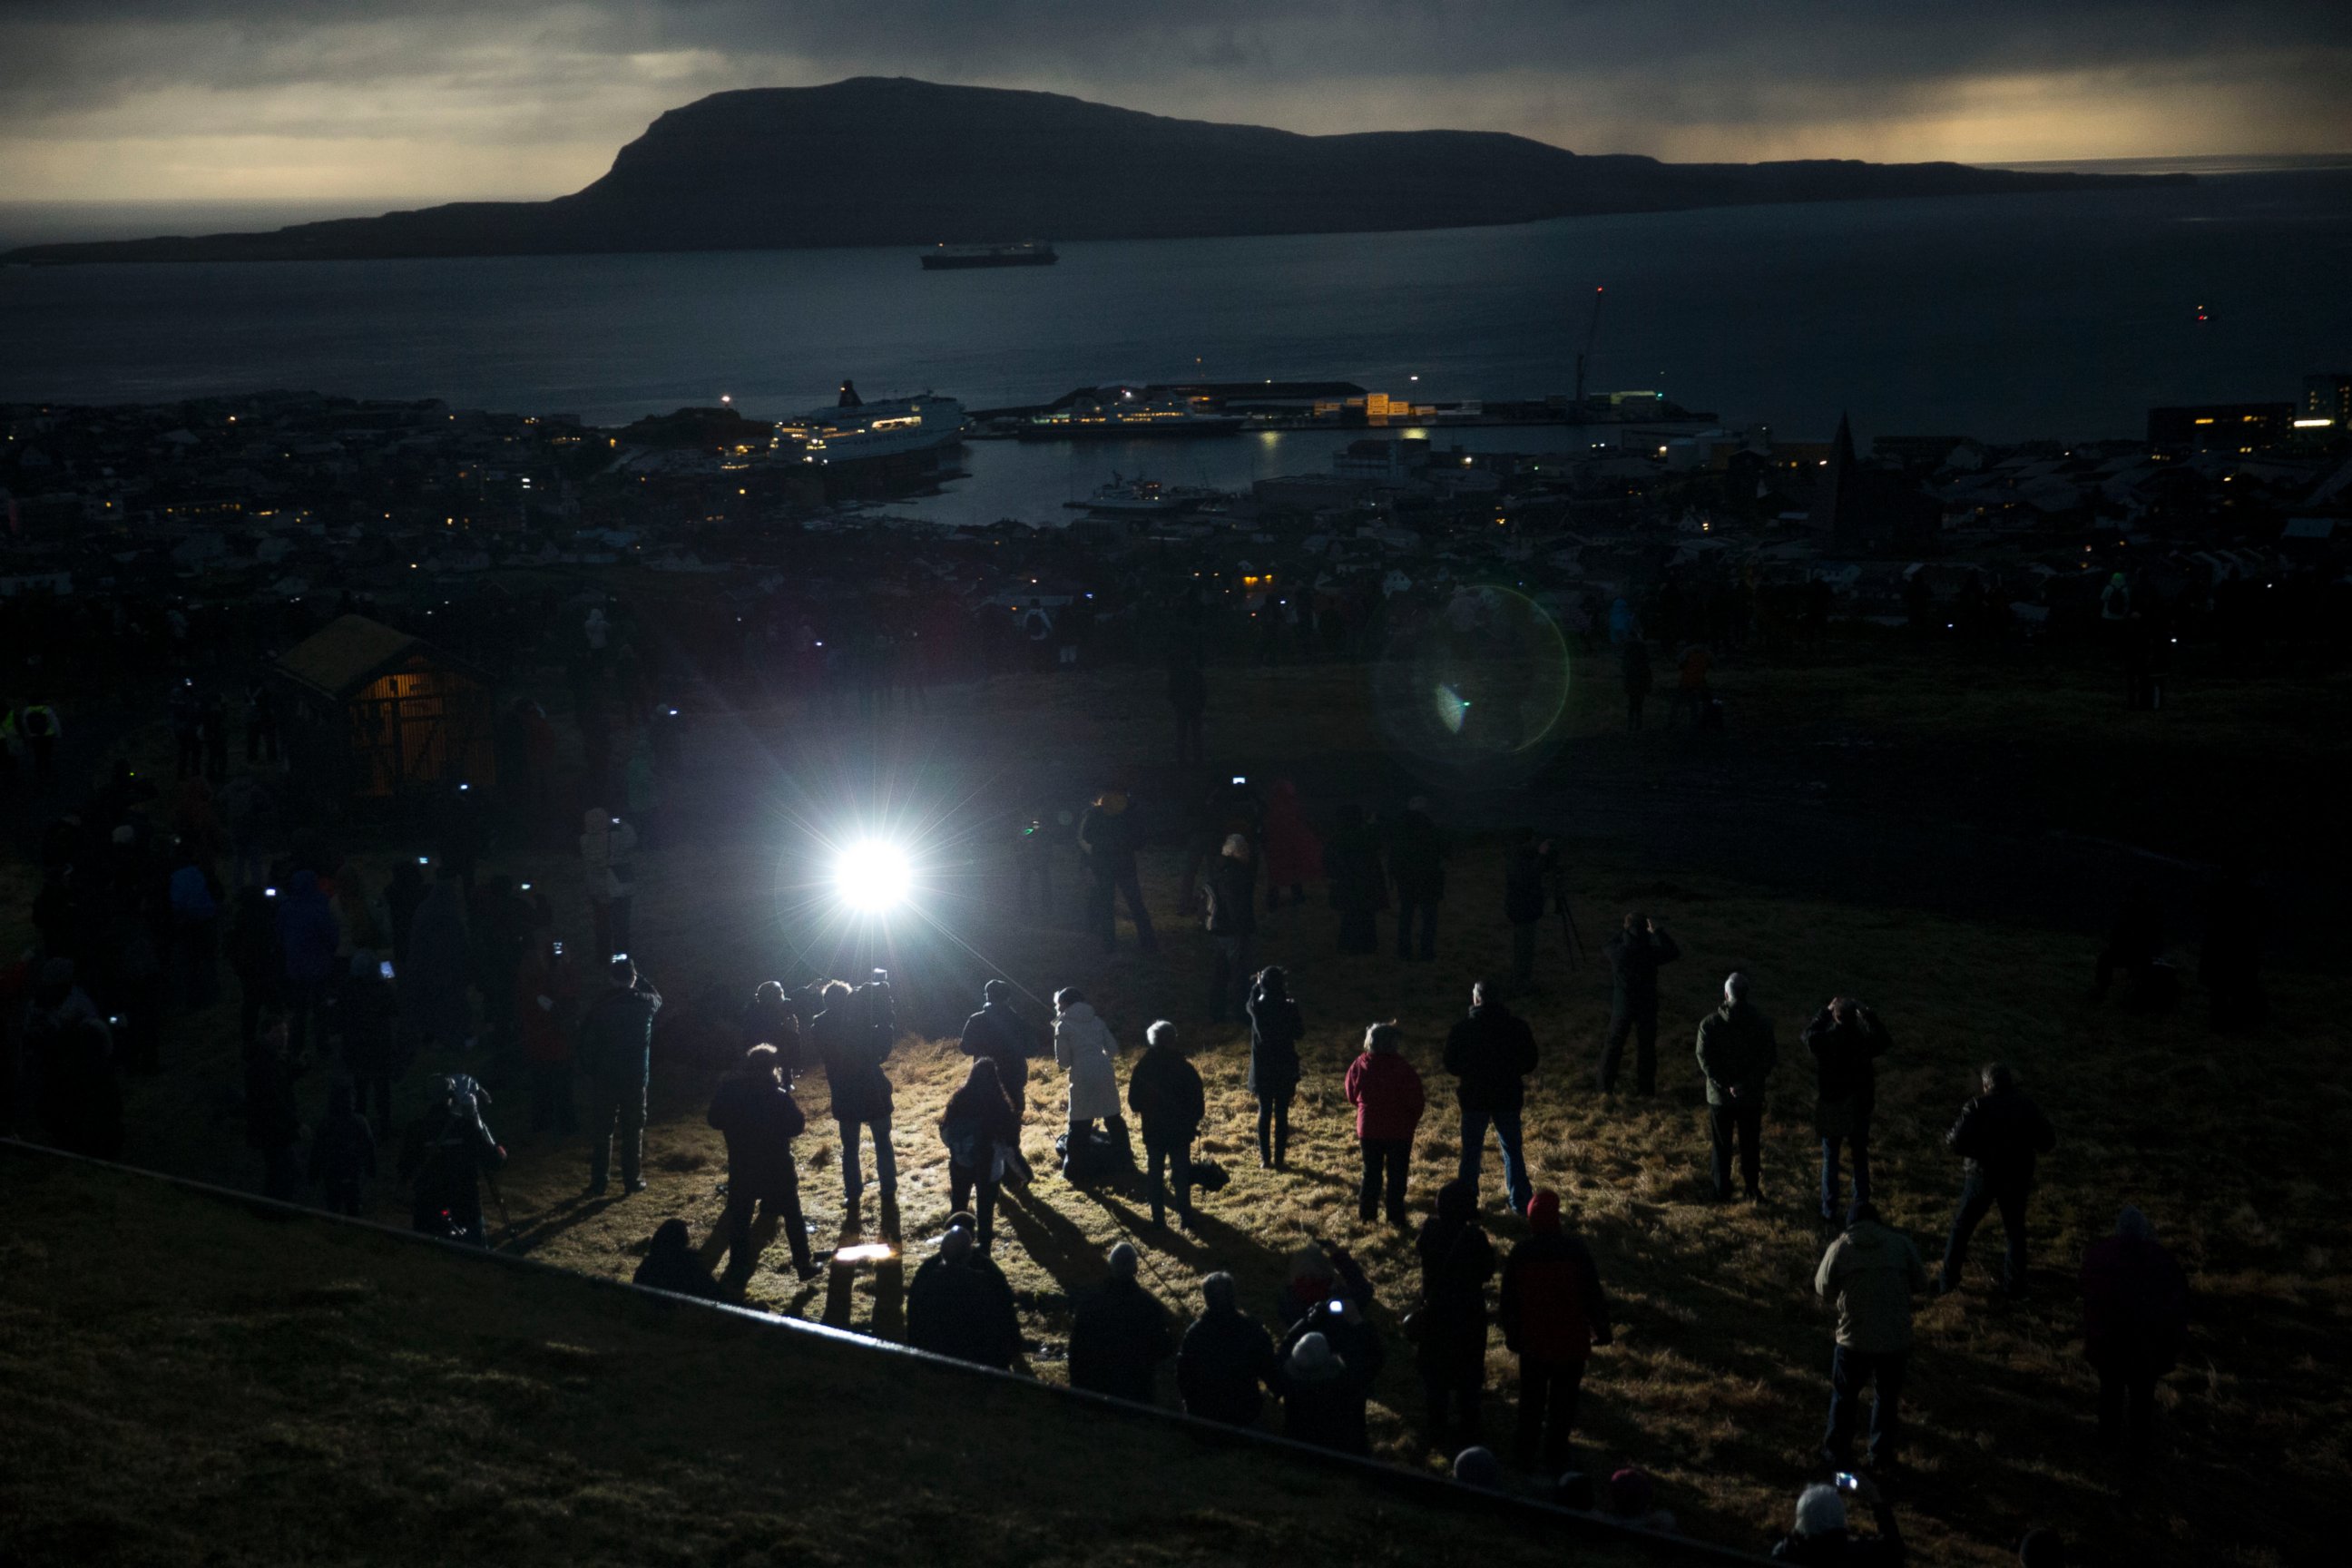 PHOTO: People watch in darkness during the totality of a solar eclipse on as seen from a hill beside a hotel on the edge of the city overlooking Torshavn, the capital city of the Faeroe Islands, March 20, 2015.